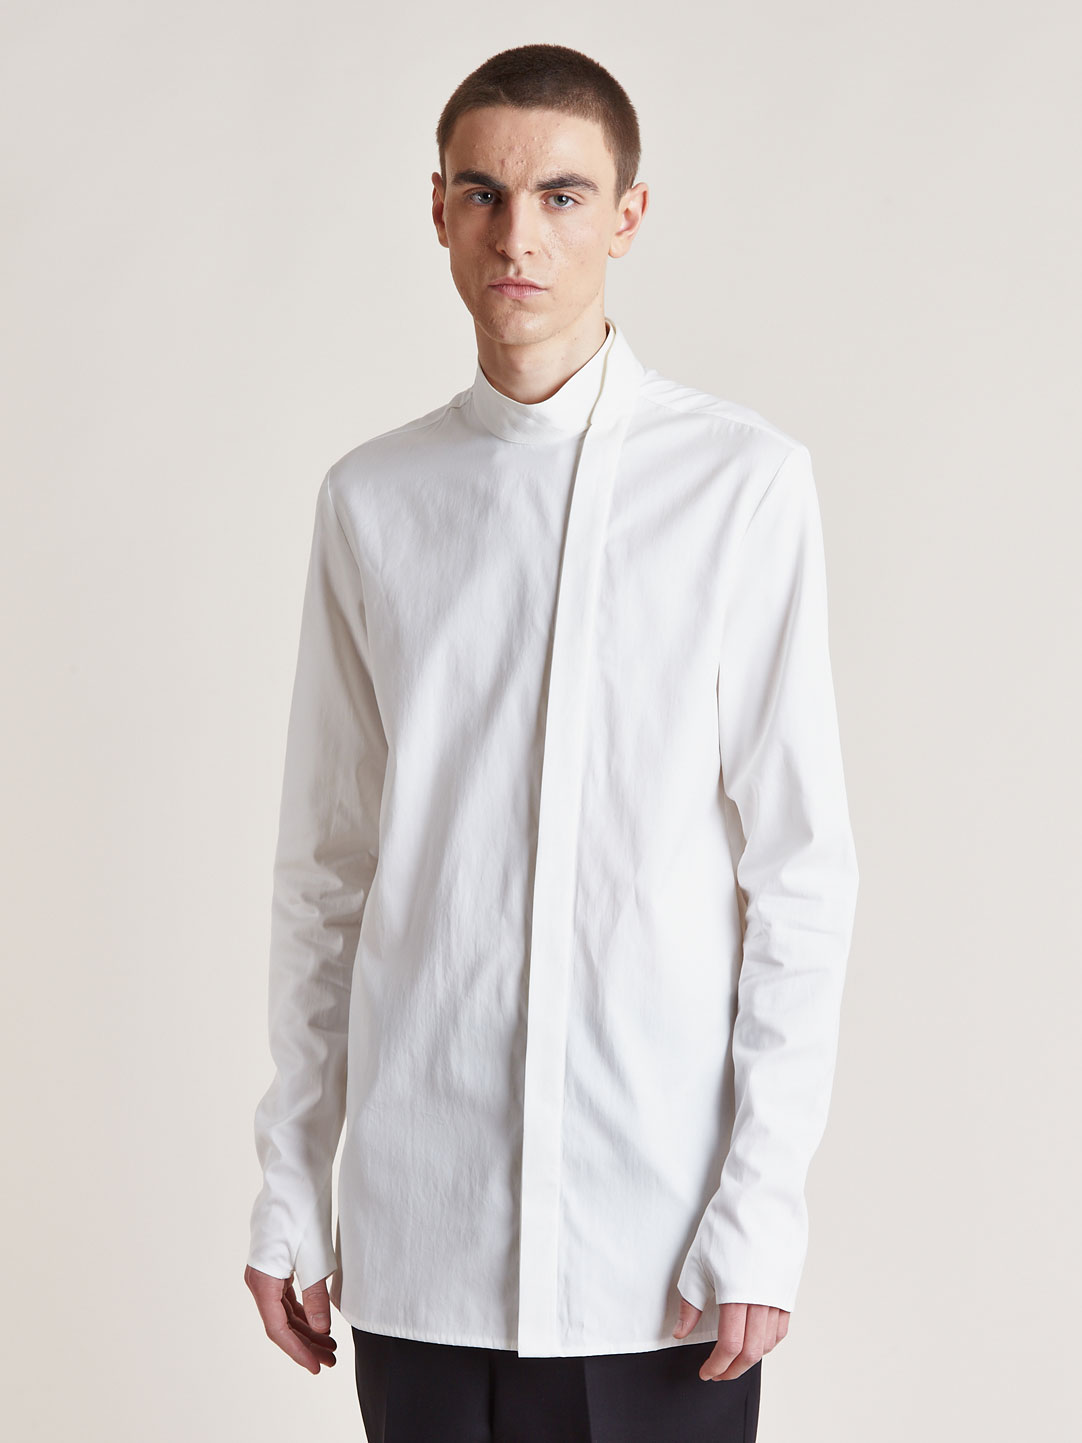 Lyst - Thamanyah Mens Dervish Collar Falconry Shirt in White for Men